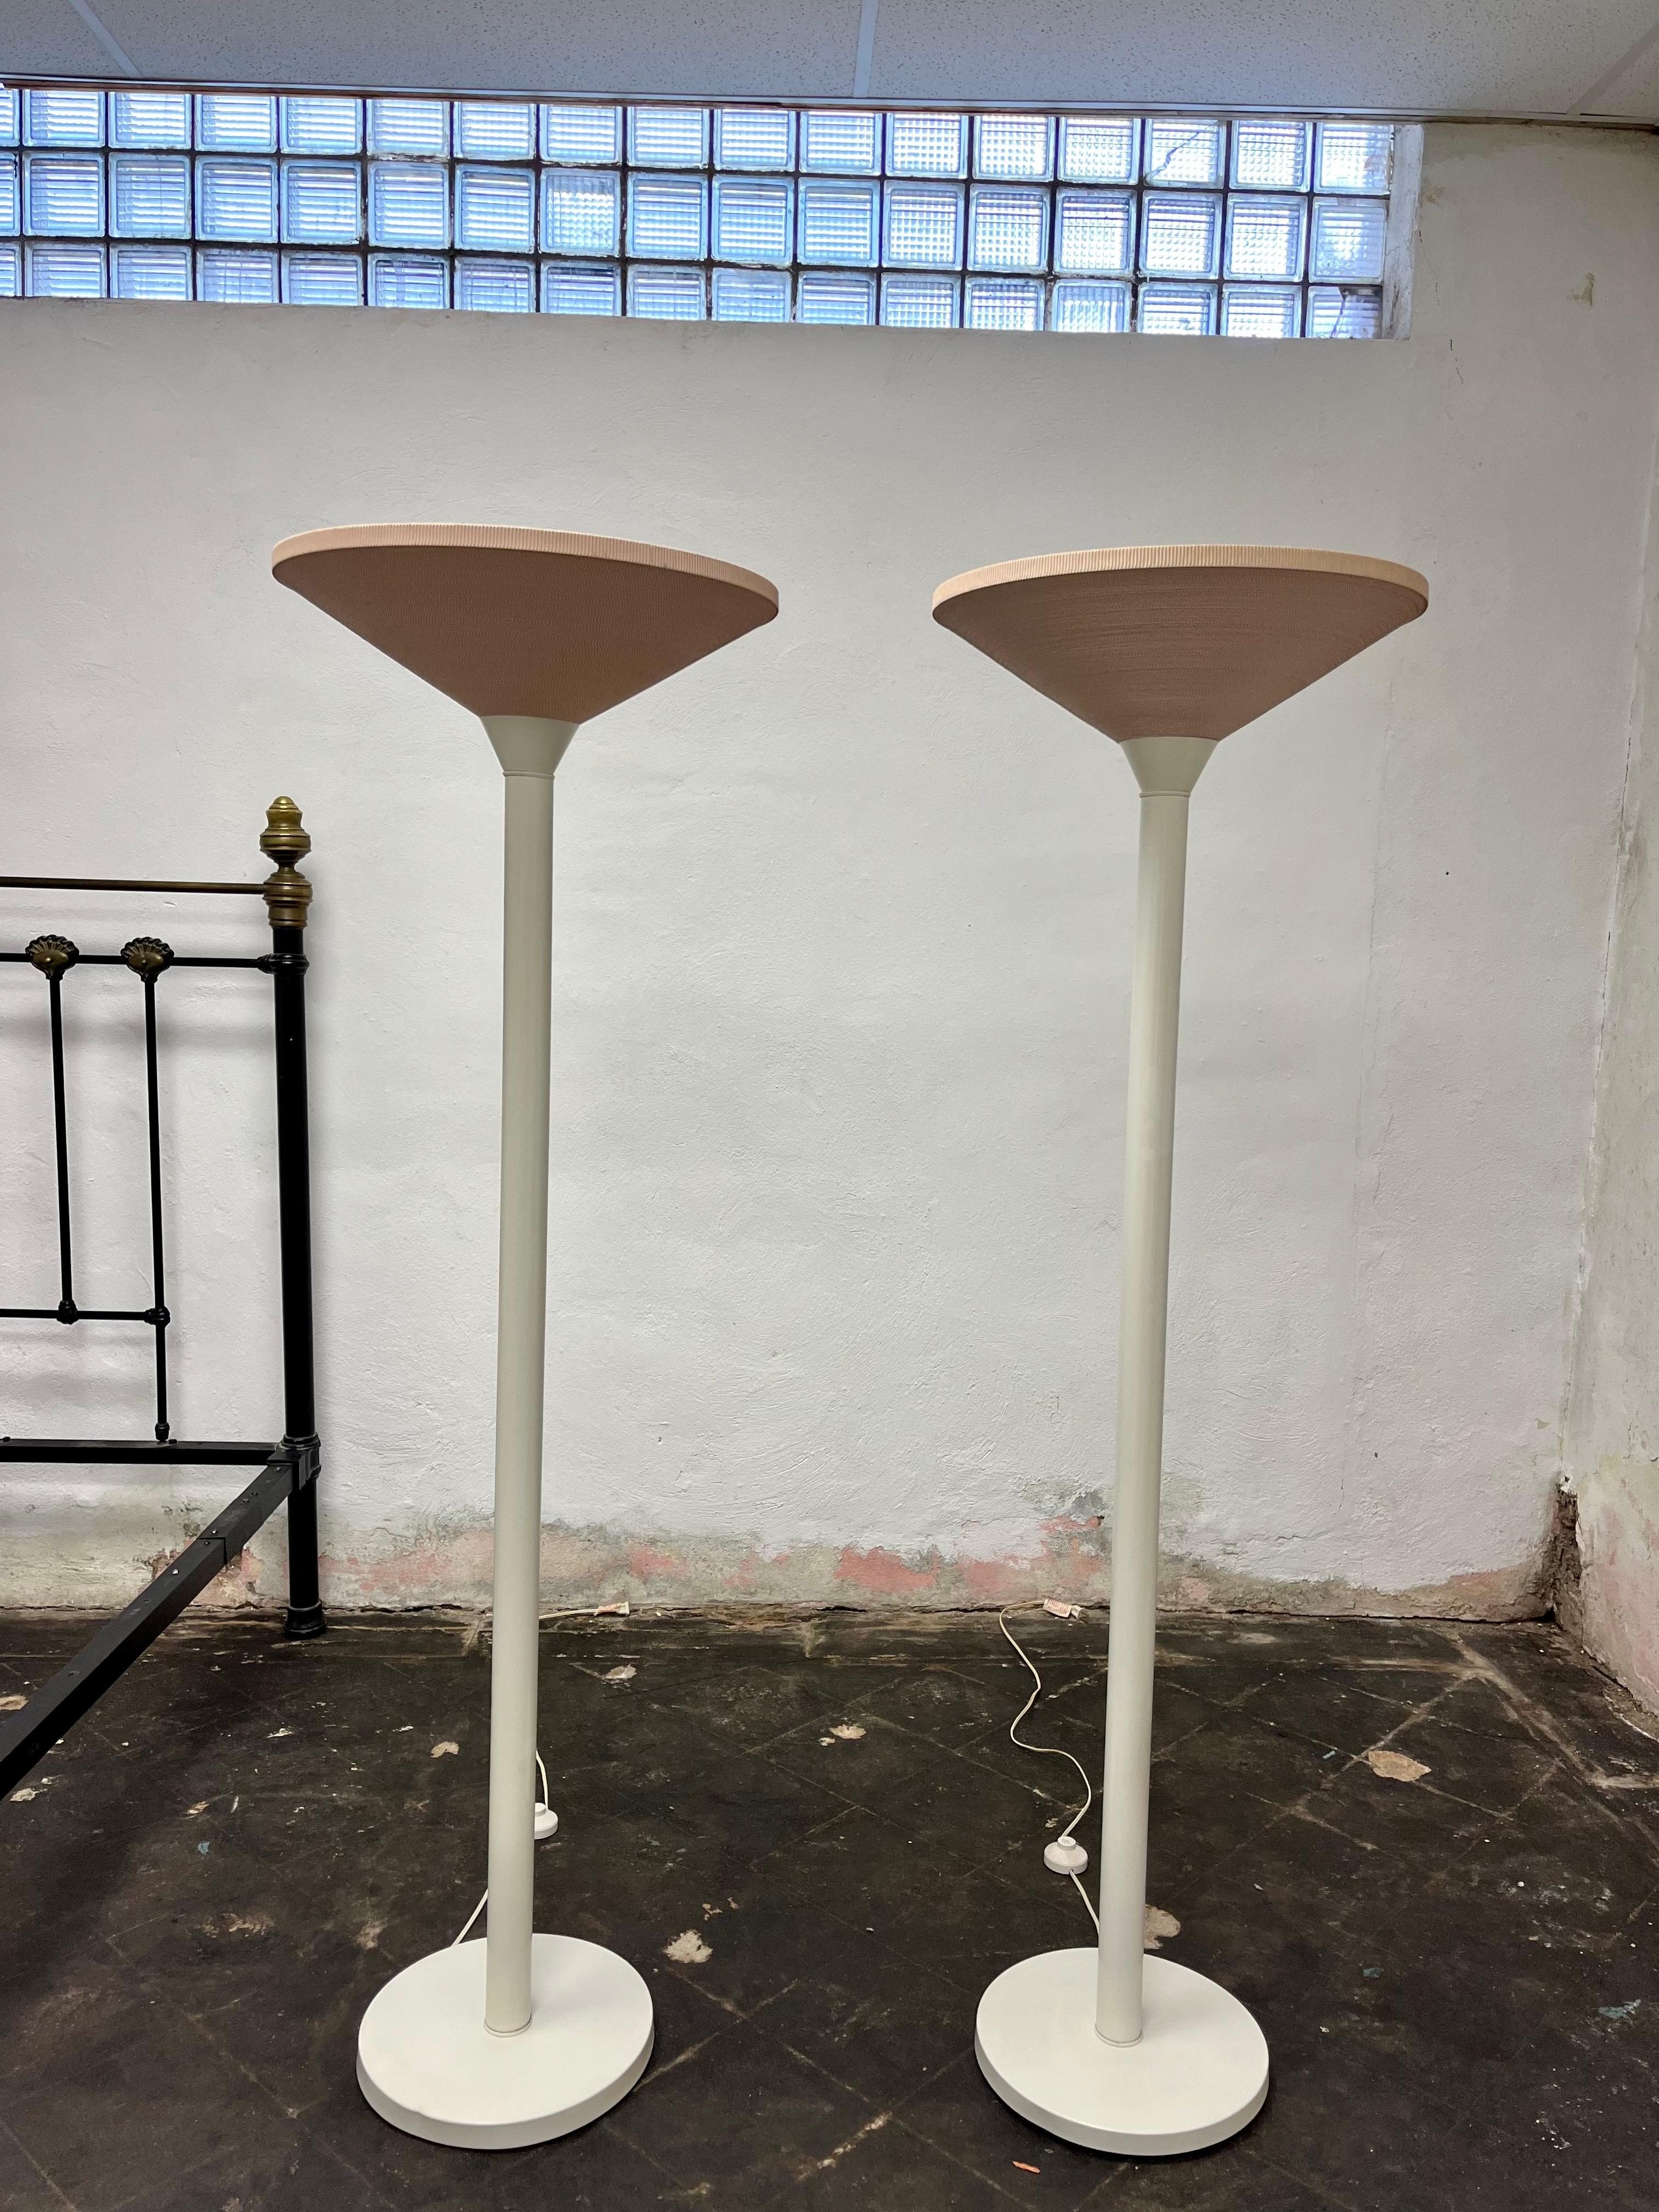 Spectacular example of Postmodern design. White metal floor lamps or torchieres with Corrugated Cardboard shade in a soft pink color. Time warp pieces. Great casting when lit offering subtle lighting. As close to perfect condition with one small